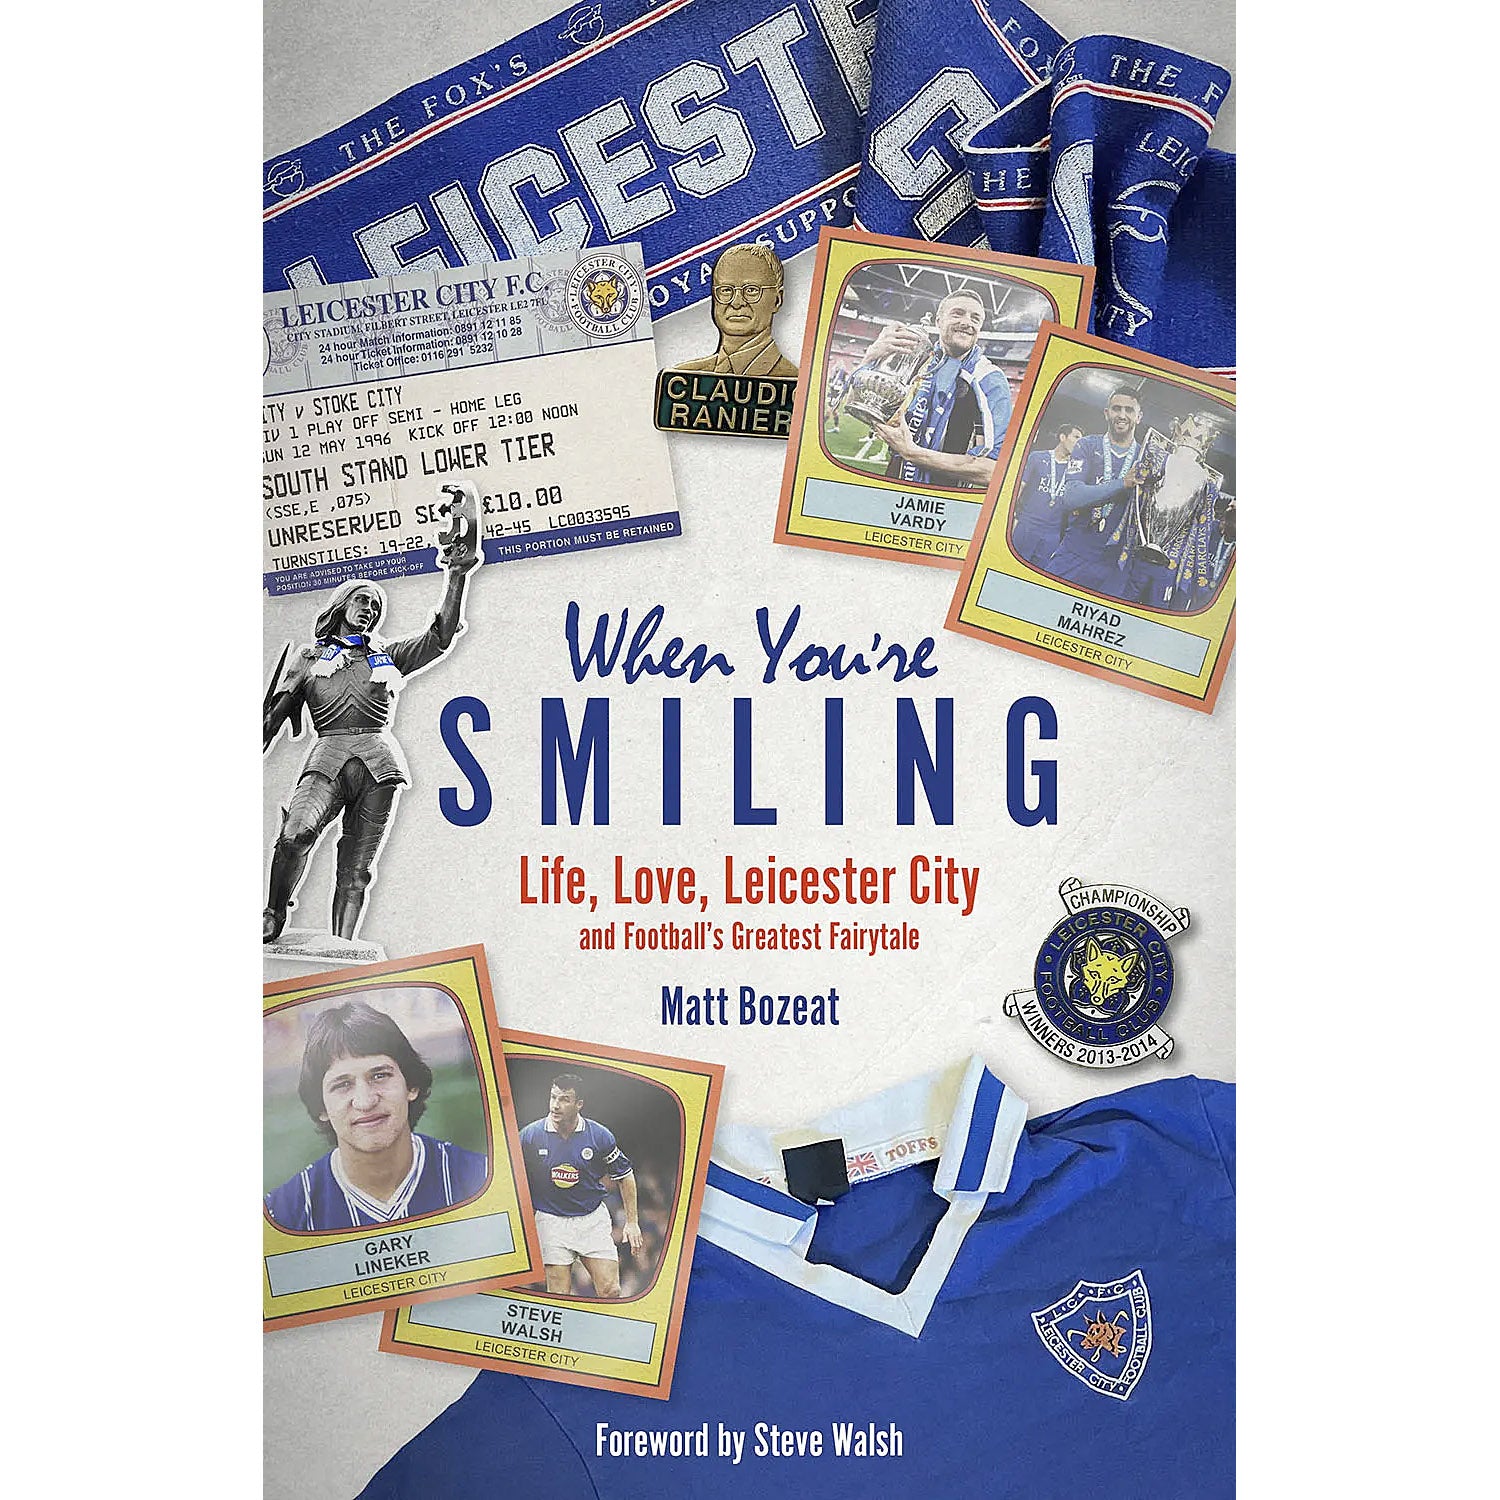 When You're Smiling – Life, Love, Leicester City and Football's Greatest Fairytale